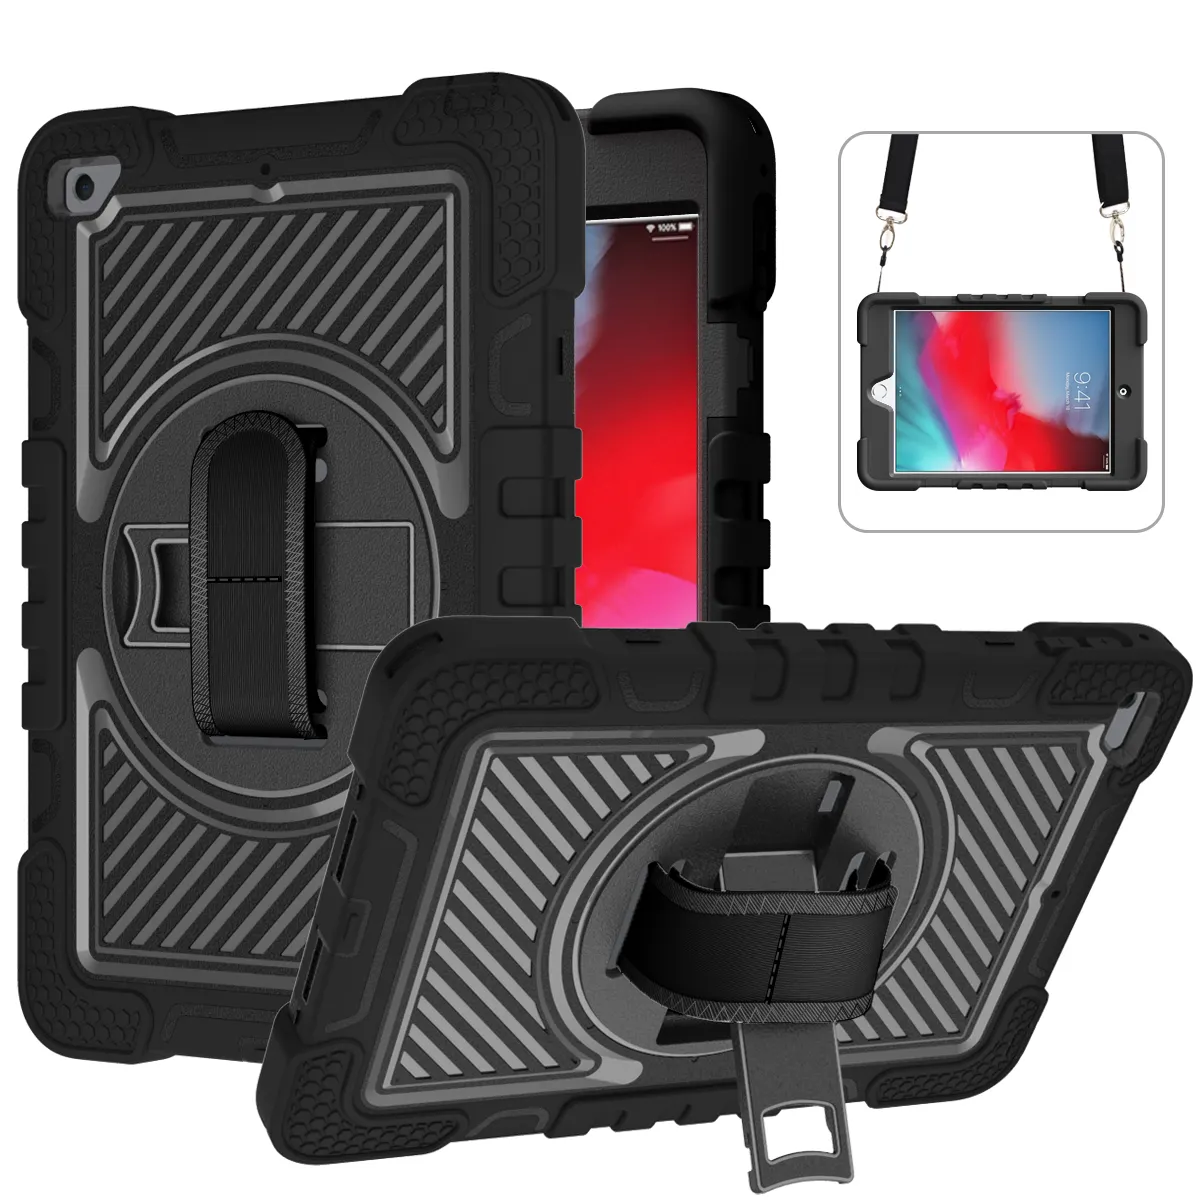 Rotating Stand Shockproof Protective Case For iPad Mini 4/Mini 5 7.9 Inch 4th/5th Gen Built-in Shoulder Strap Hand Strap Cover